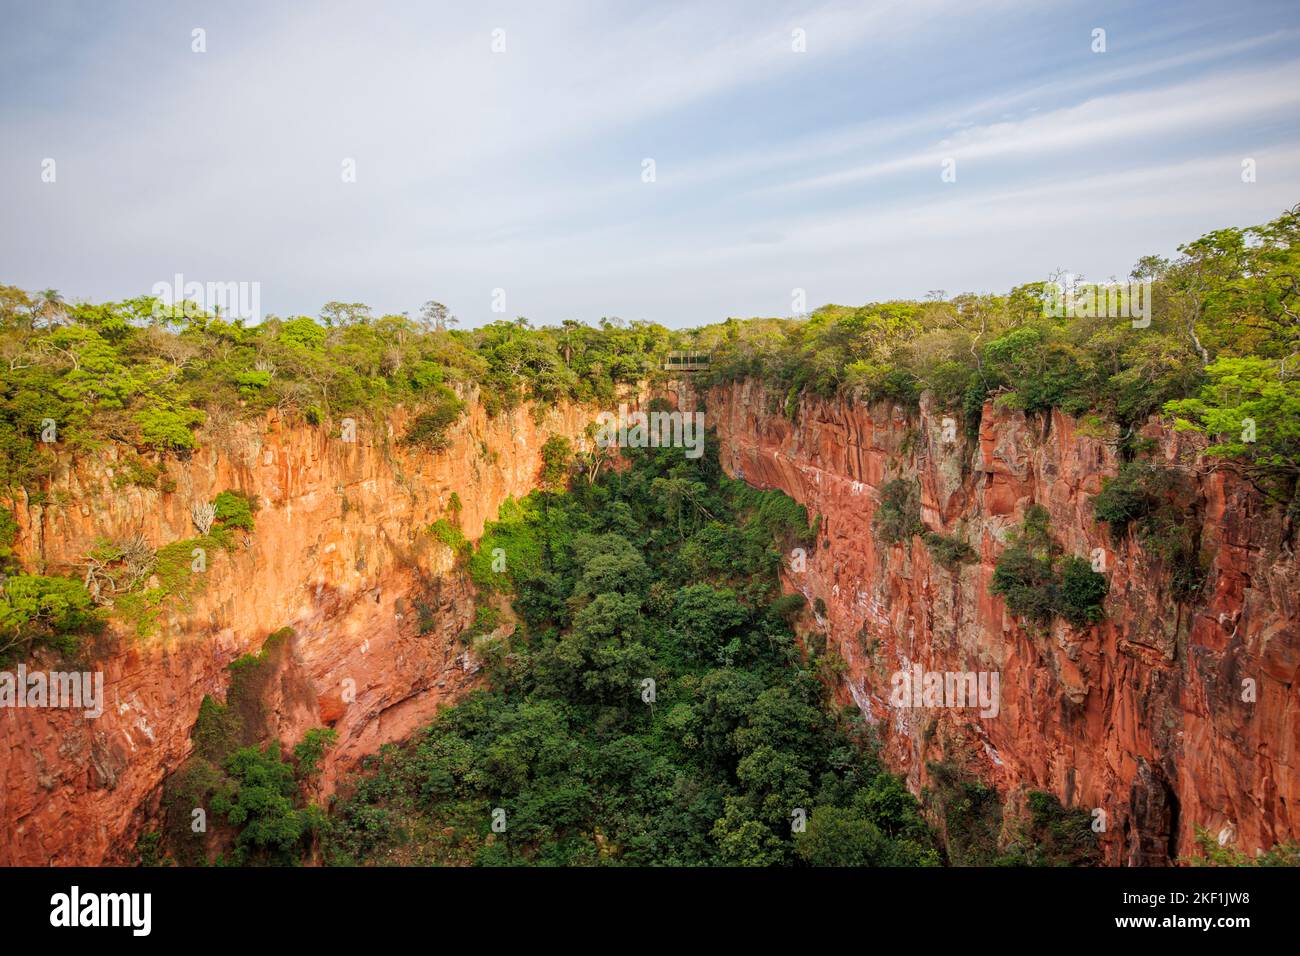 Buraco das Araras Private Natural Heritage Reserve, a large natural sinkhole, Jardim, southern Pantanal, Mato Grosso do Sul, Brazil, in morning light Stock Photo